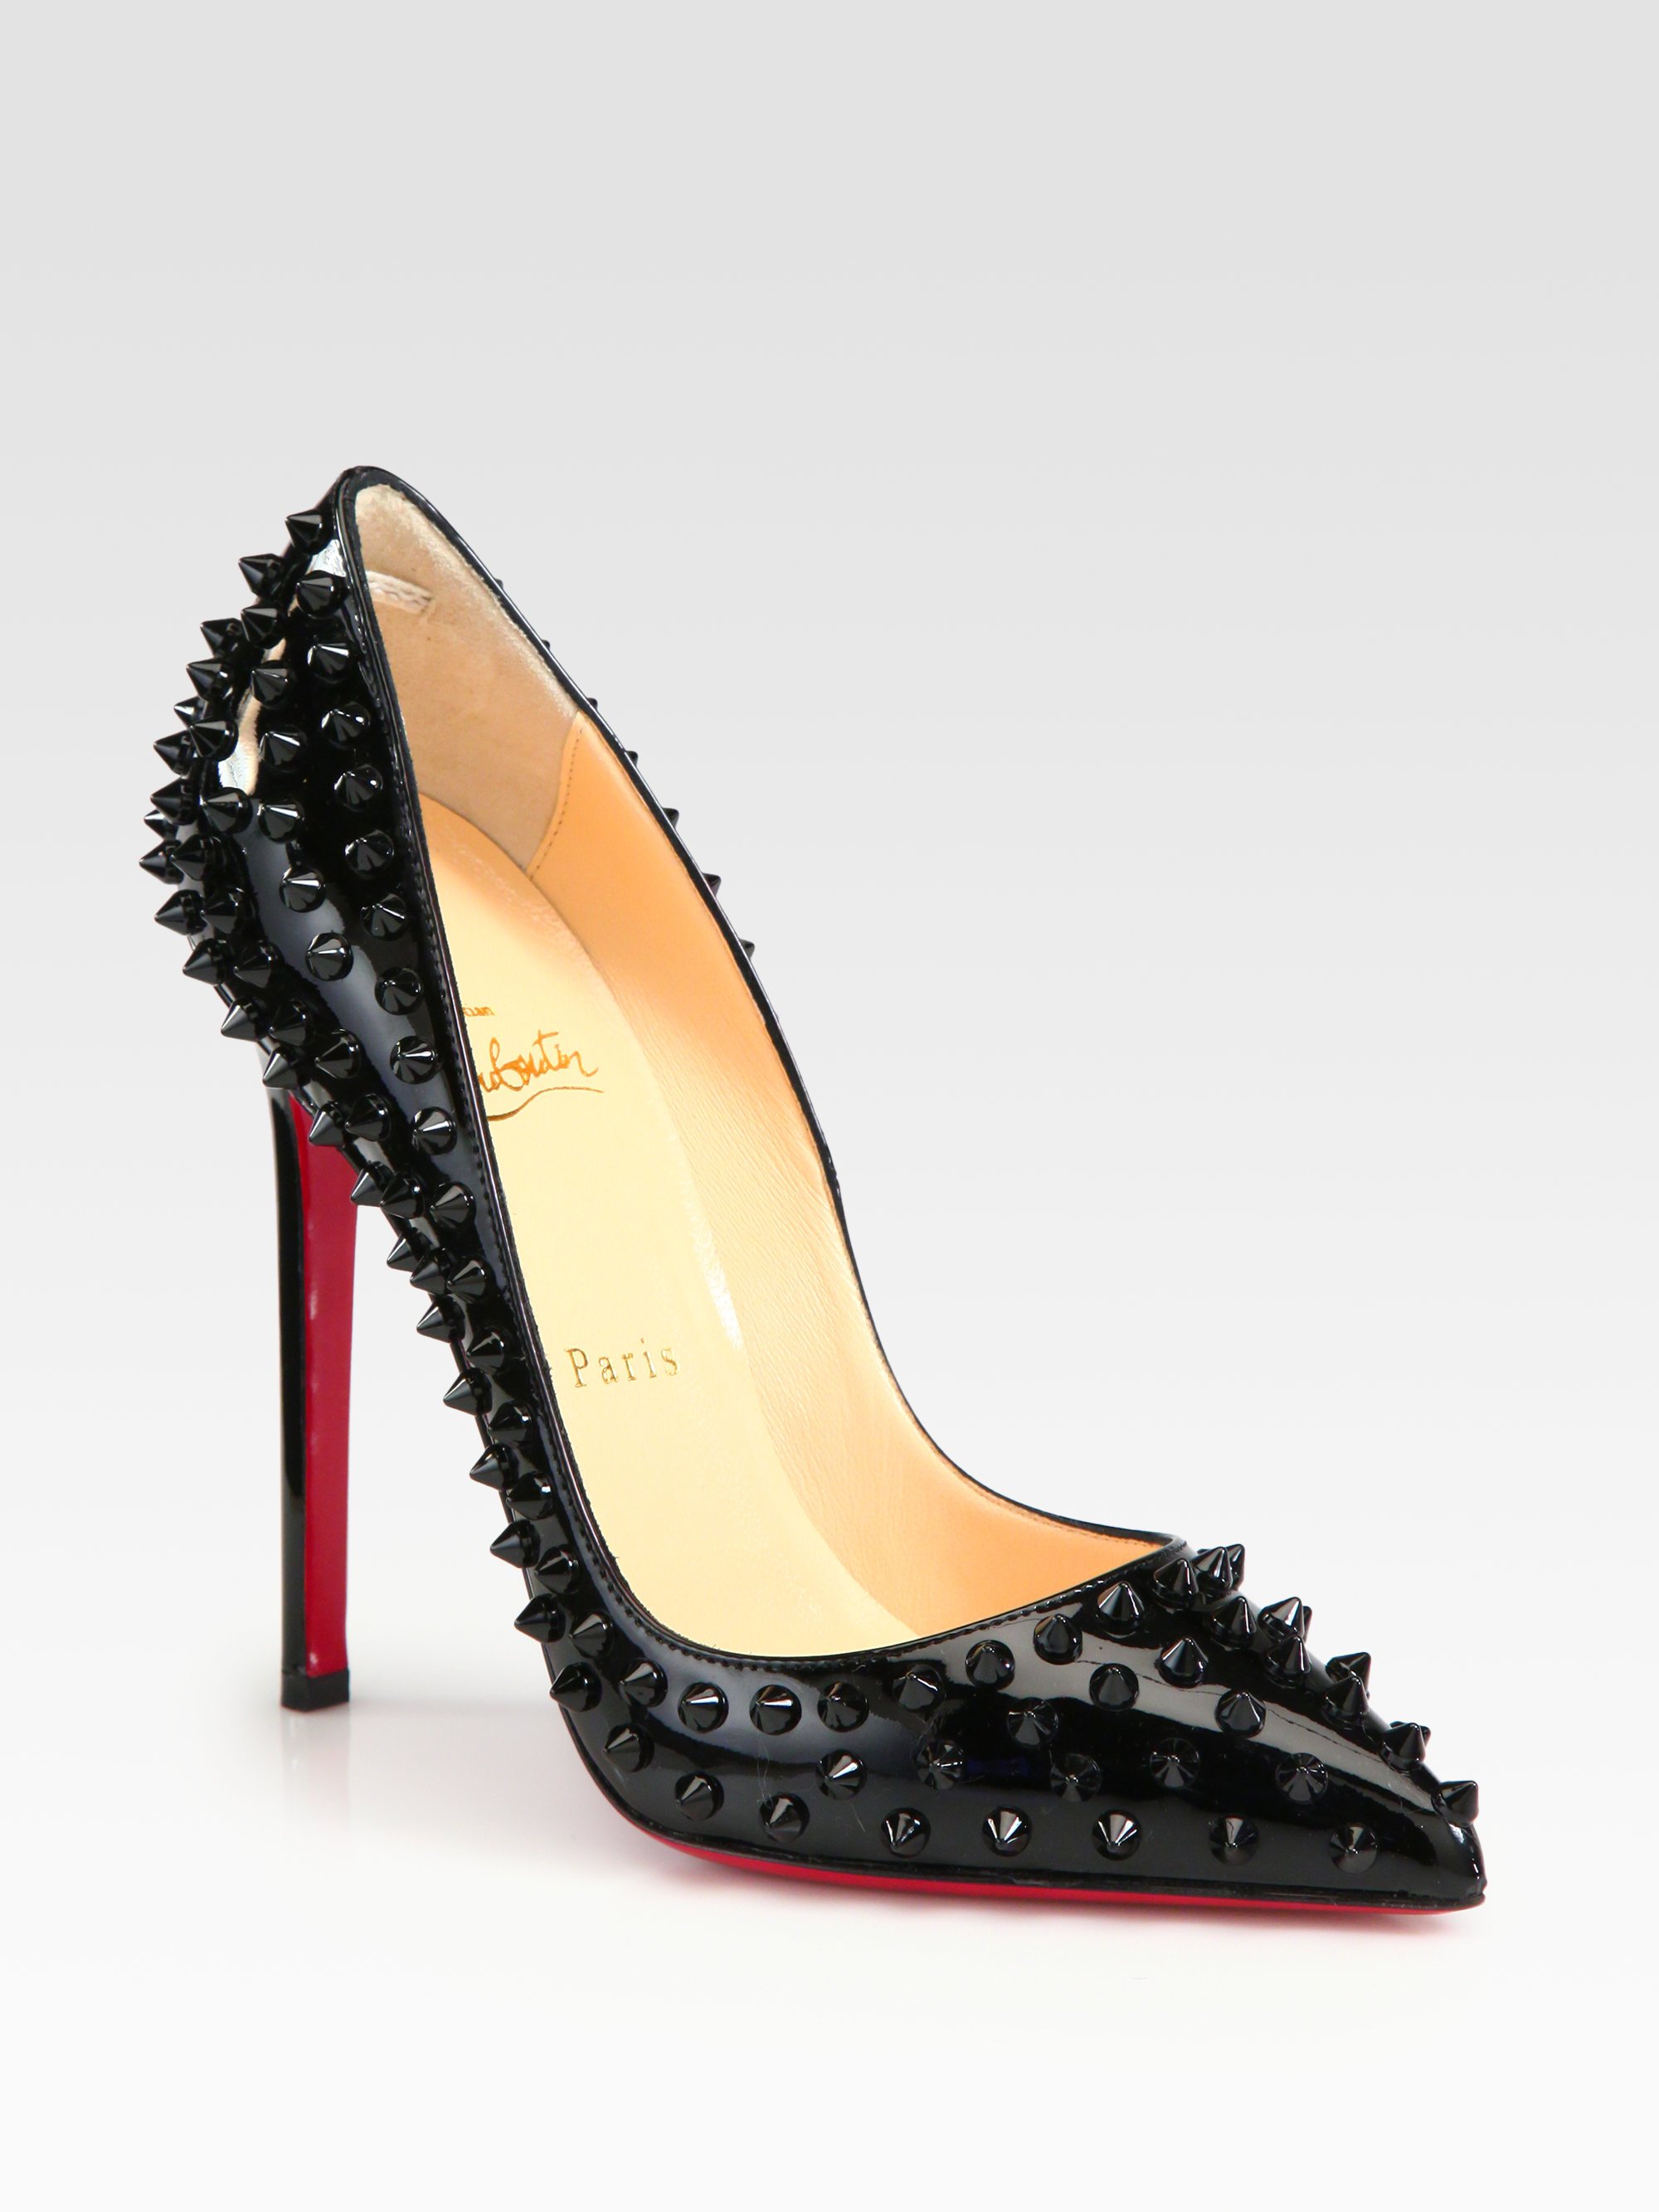 Louboutin Pigalle 120m Spikes Patent Leather Pumps in Black |